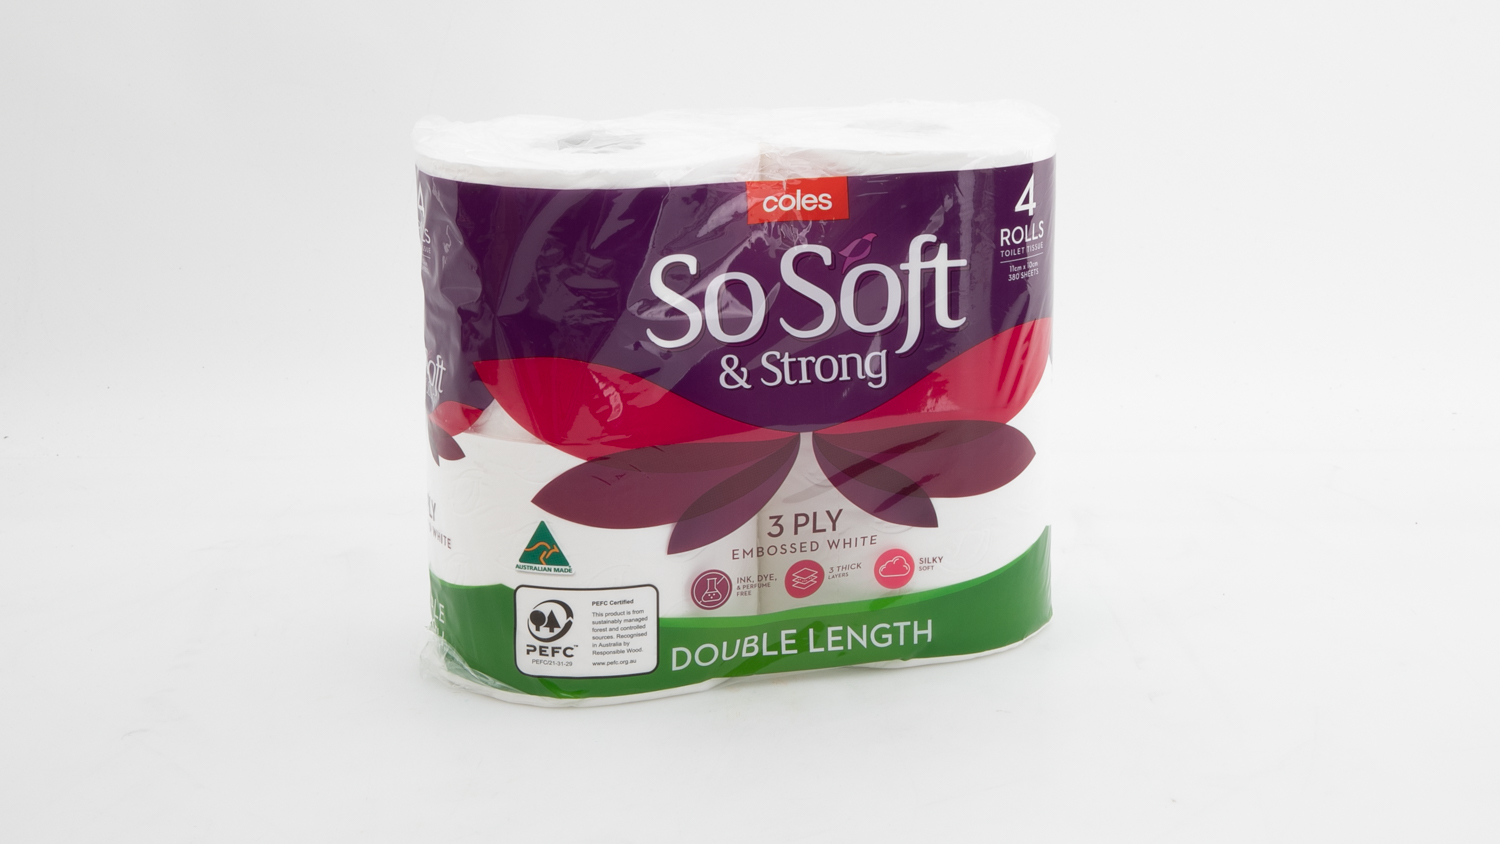  Quilted Northern Ultra Soft & Strong, Toilet Paper, 12 Mega  Rolls : Health & Household